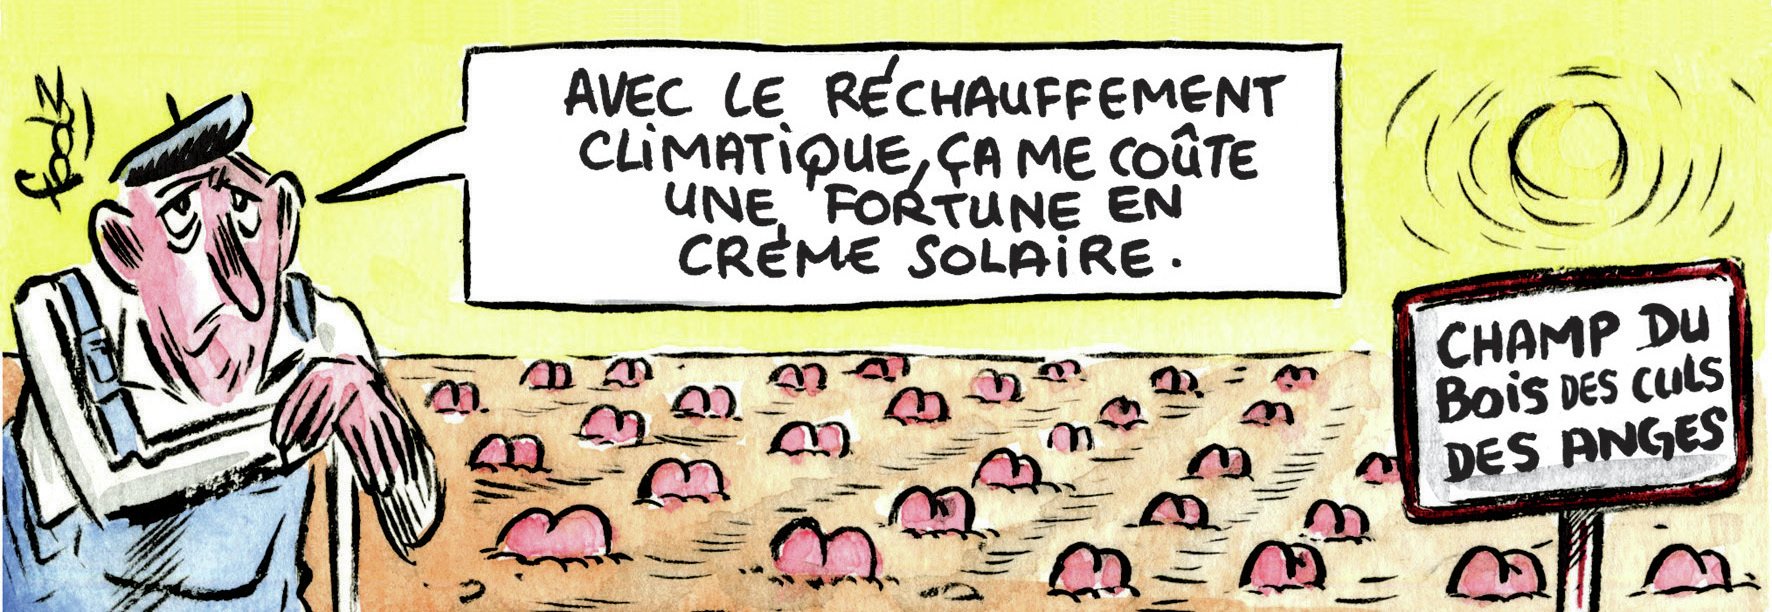 Rolin in the ass of angels Charlie Hebdo